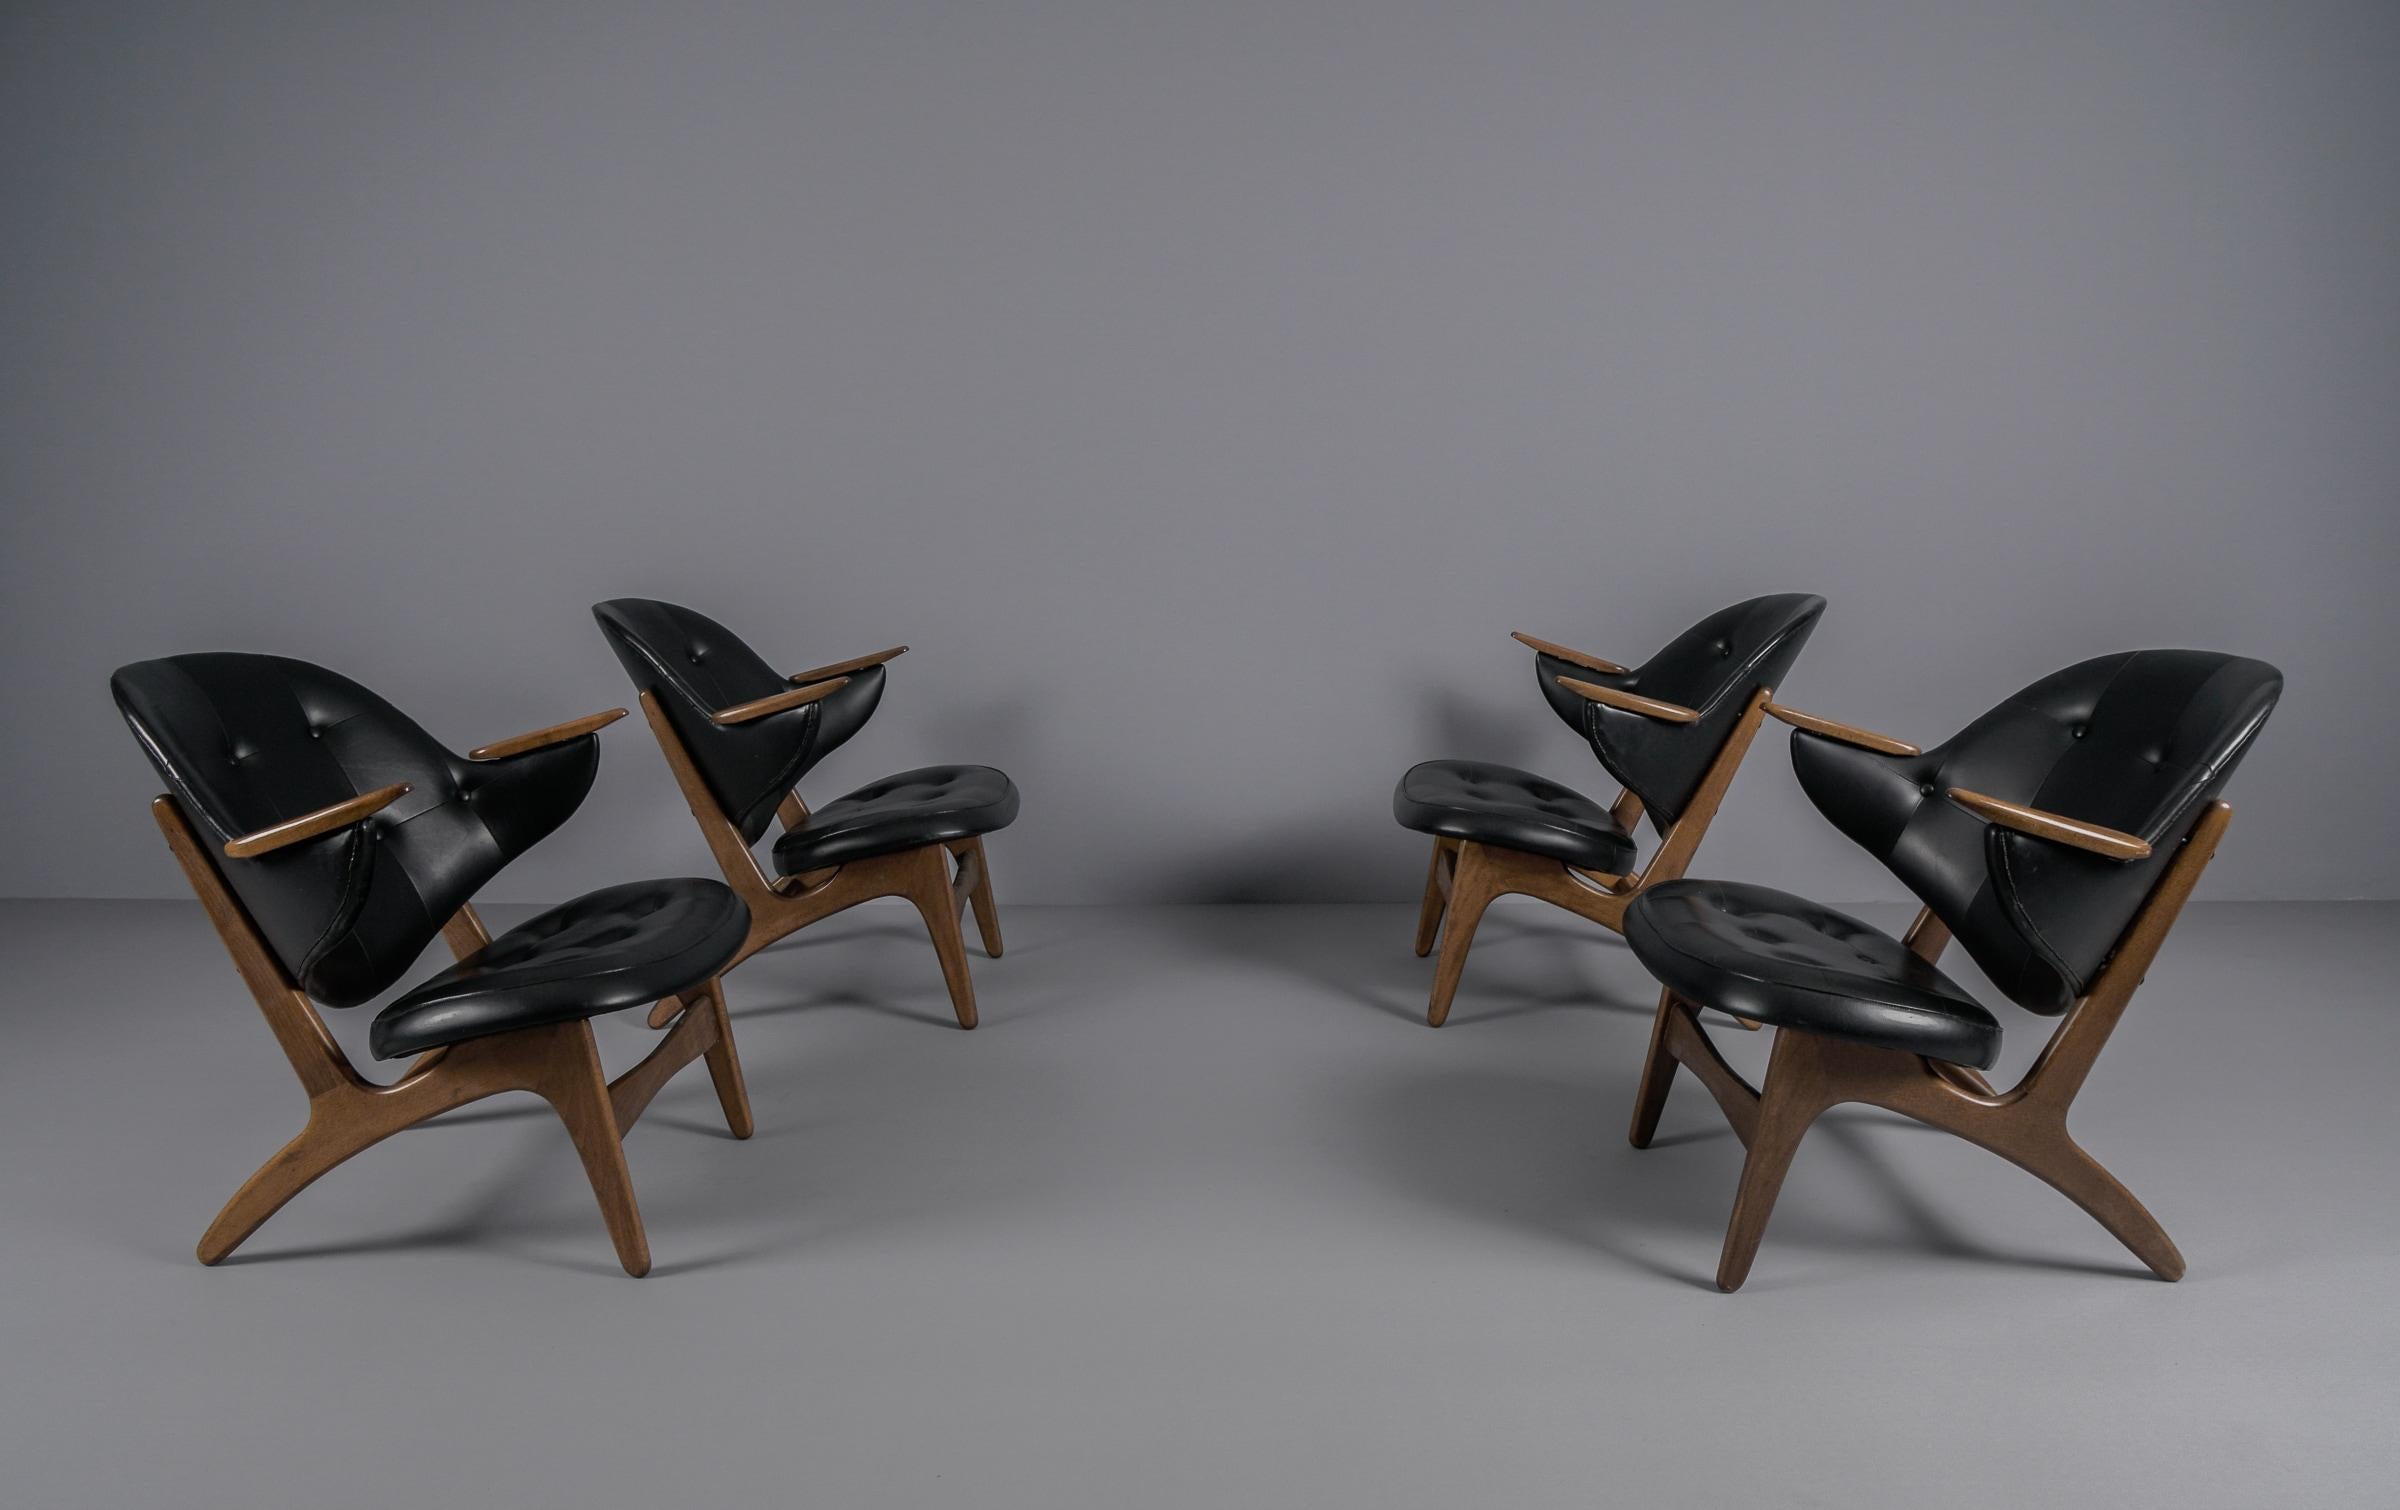 Faux Leather Set of 4 Rare Model 33 Danish Easy Chairs Designed by Carl Edward Matthes, 1950s For Sale